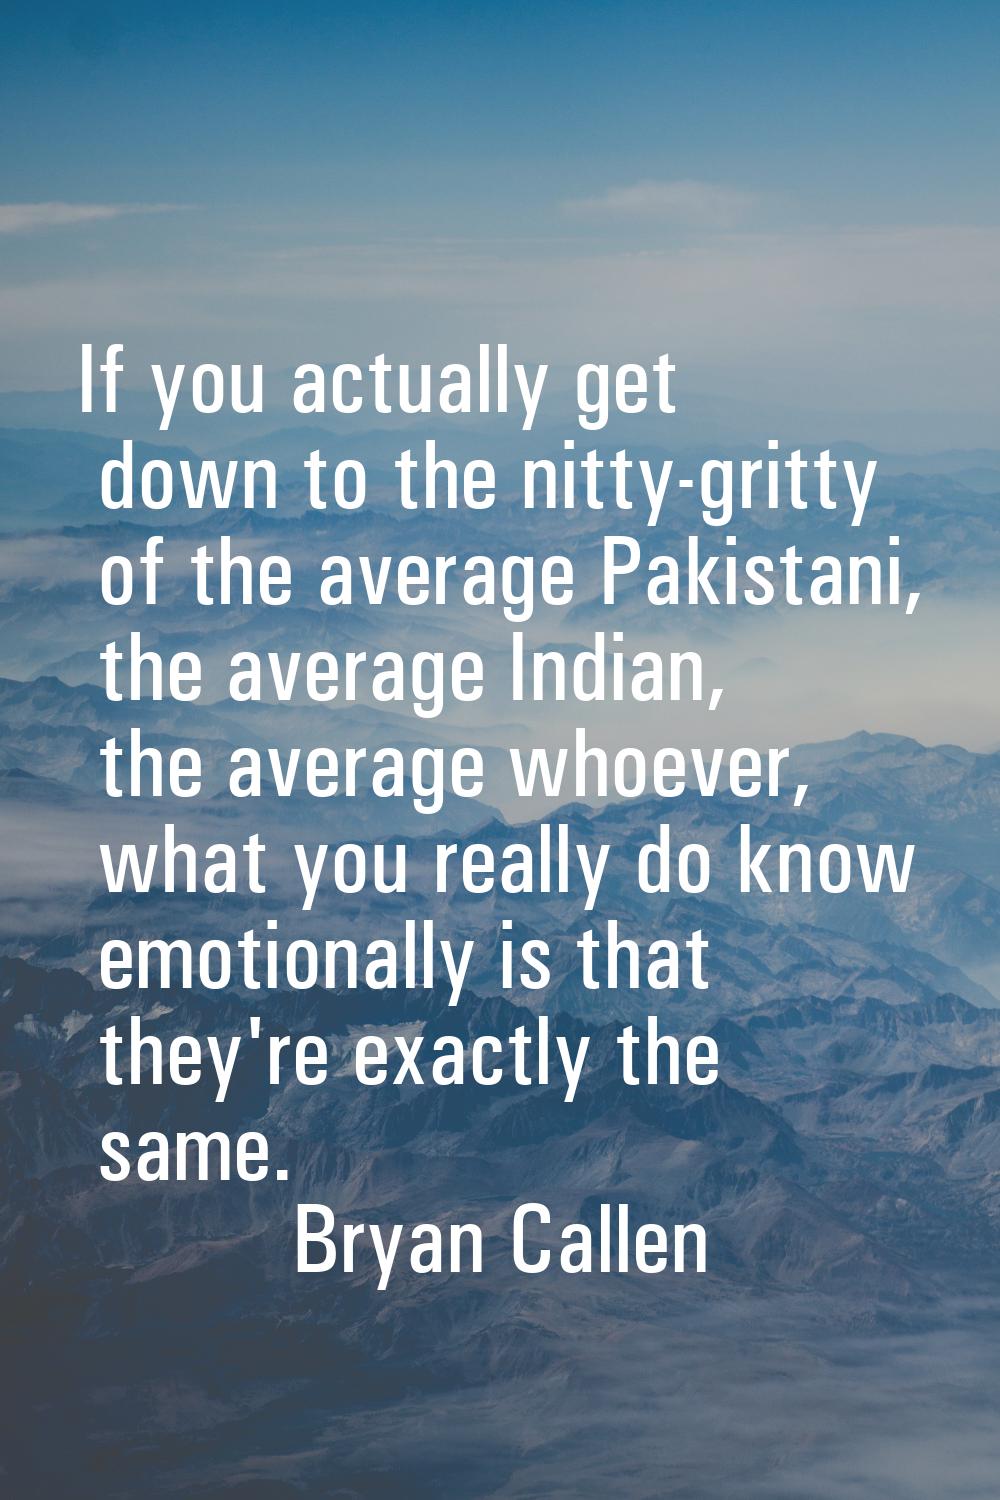 If you actually get down to the nitty-gritty of the average Pakistani, the average Indian, the aver